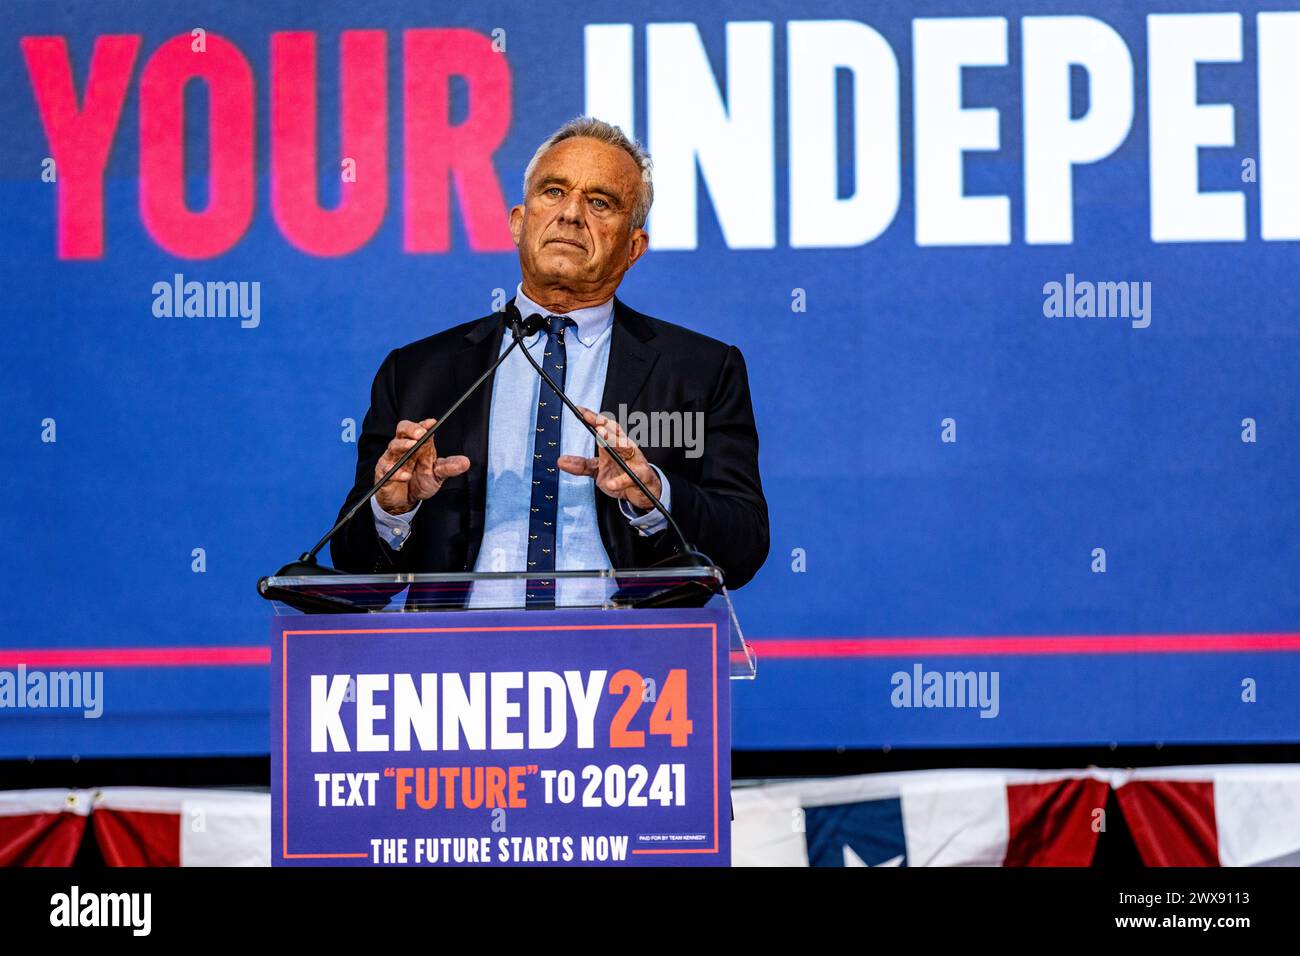 Independent presidential candidate Robert F. Kennedy introduced his running mate, Nicole Shanahan at a campaign event in Oakland, California on Tuesda Stock Photo